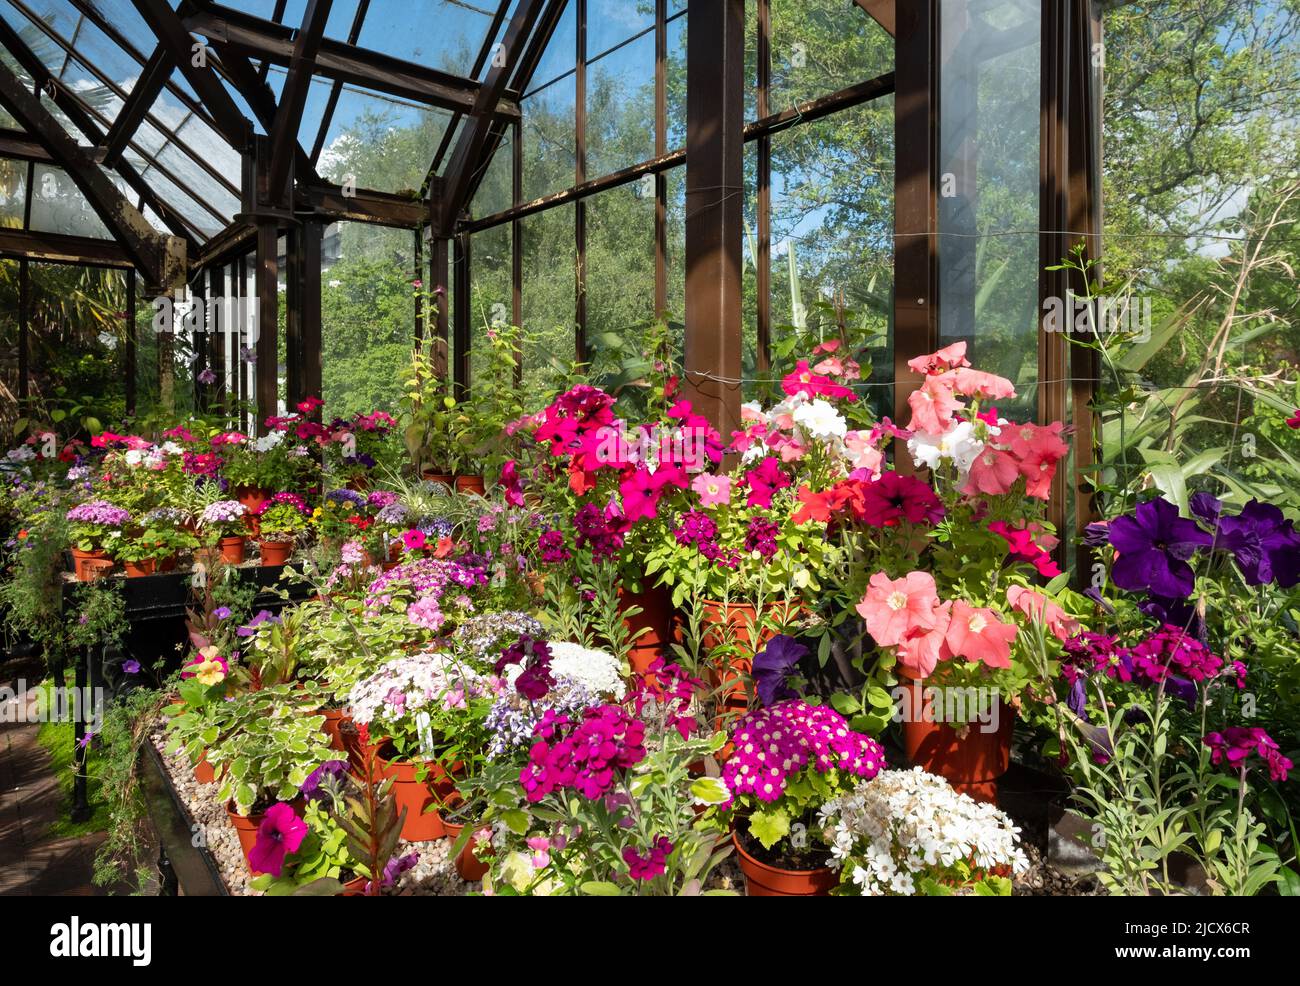 Flowering plants including petunias, phlox and pericallis cruenta, in the Palm House and Main Range of glasshouses in the Glasgow Botanic Garden, UK. Stock Photo